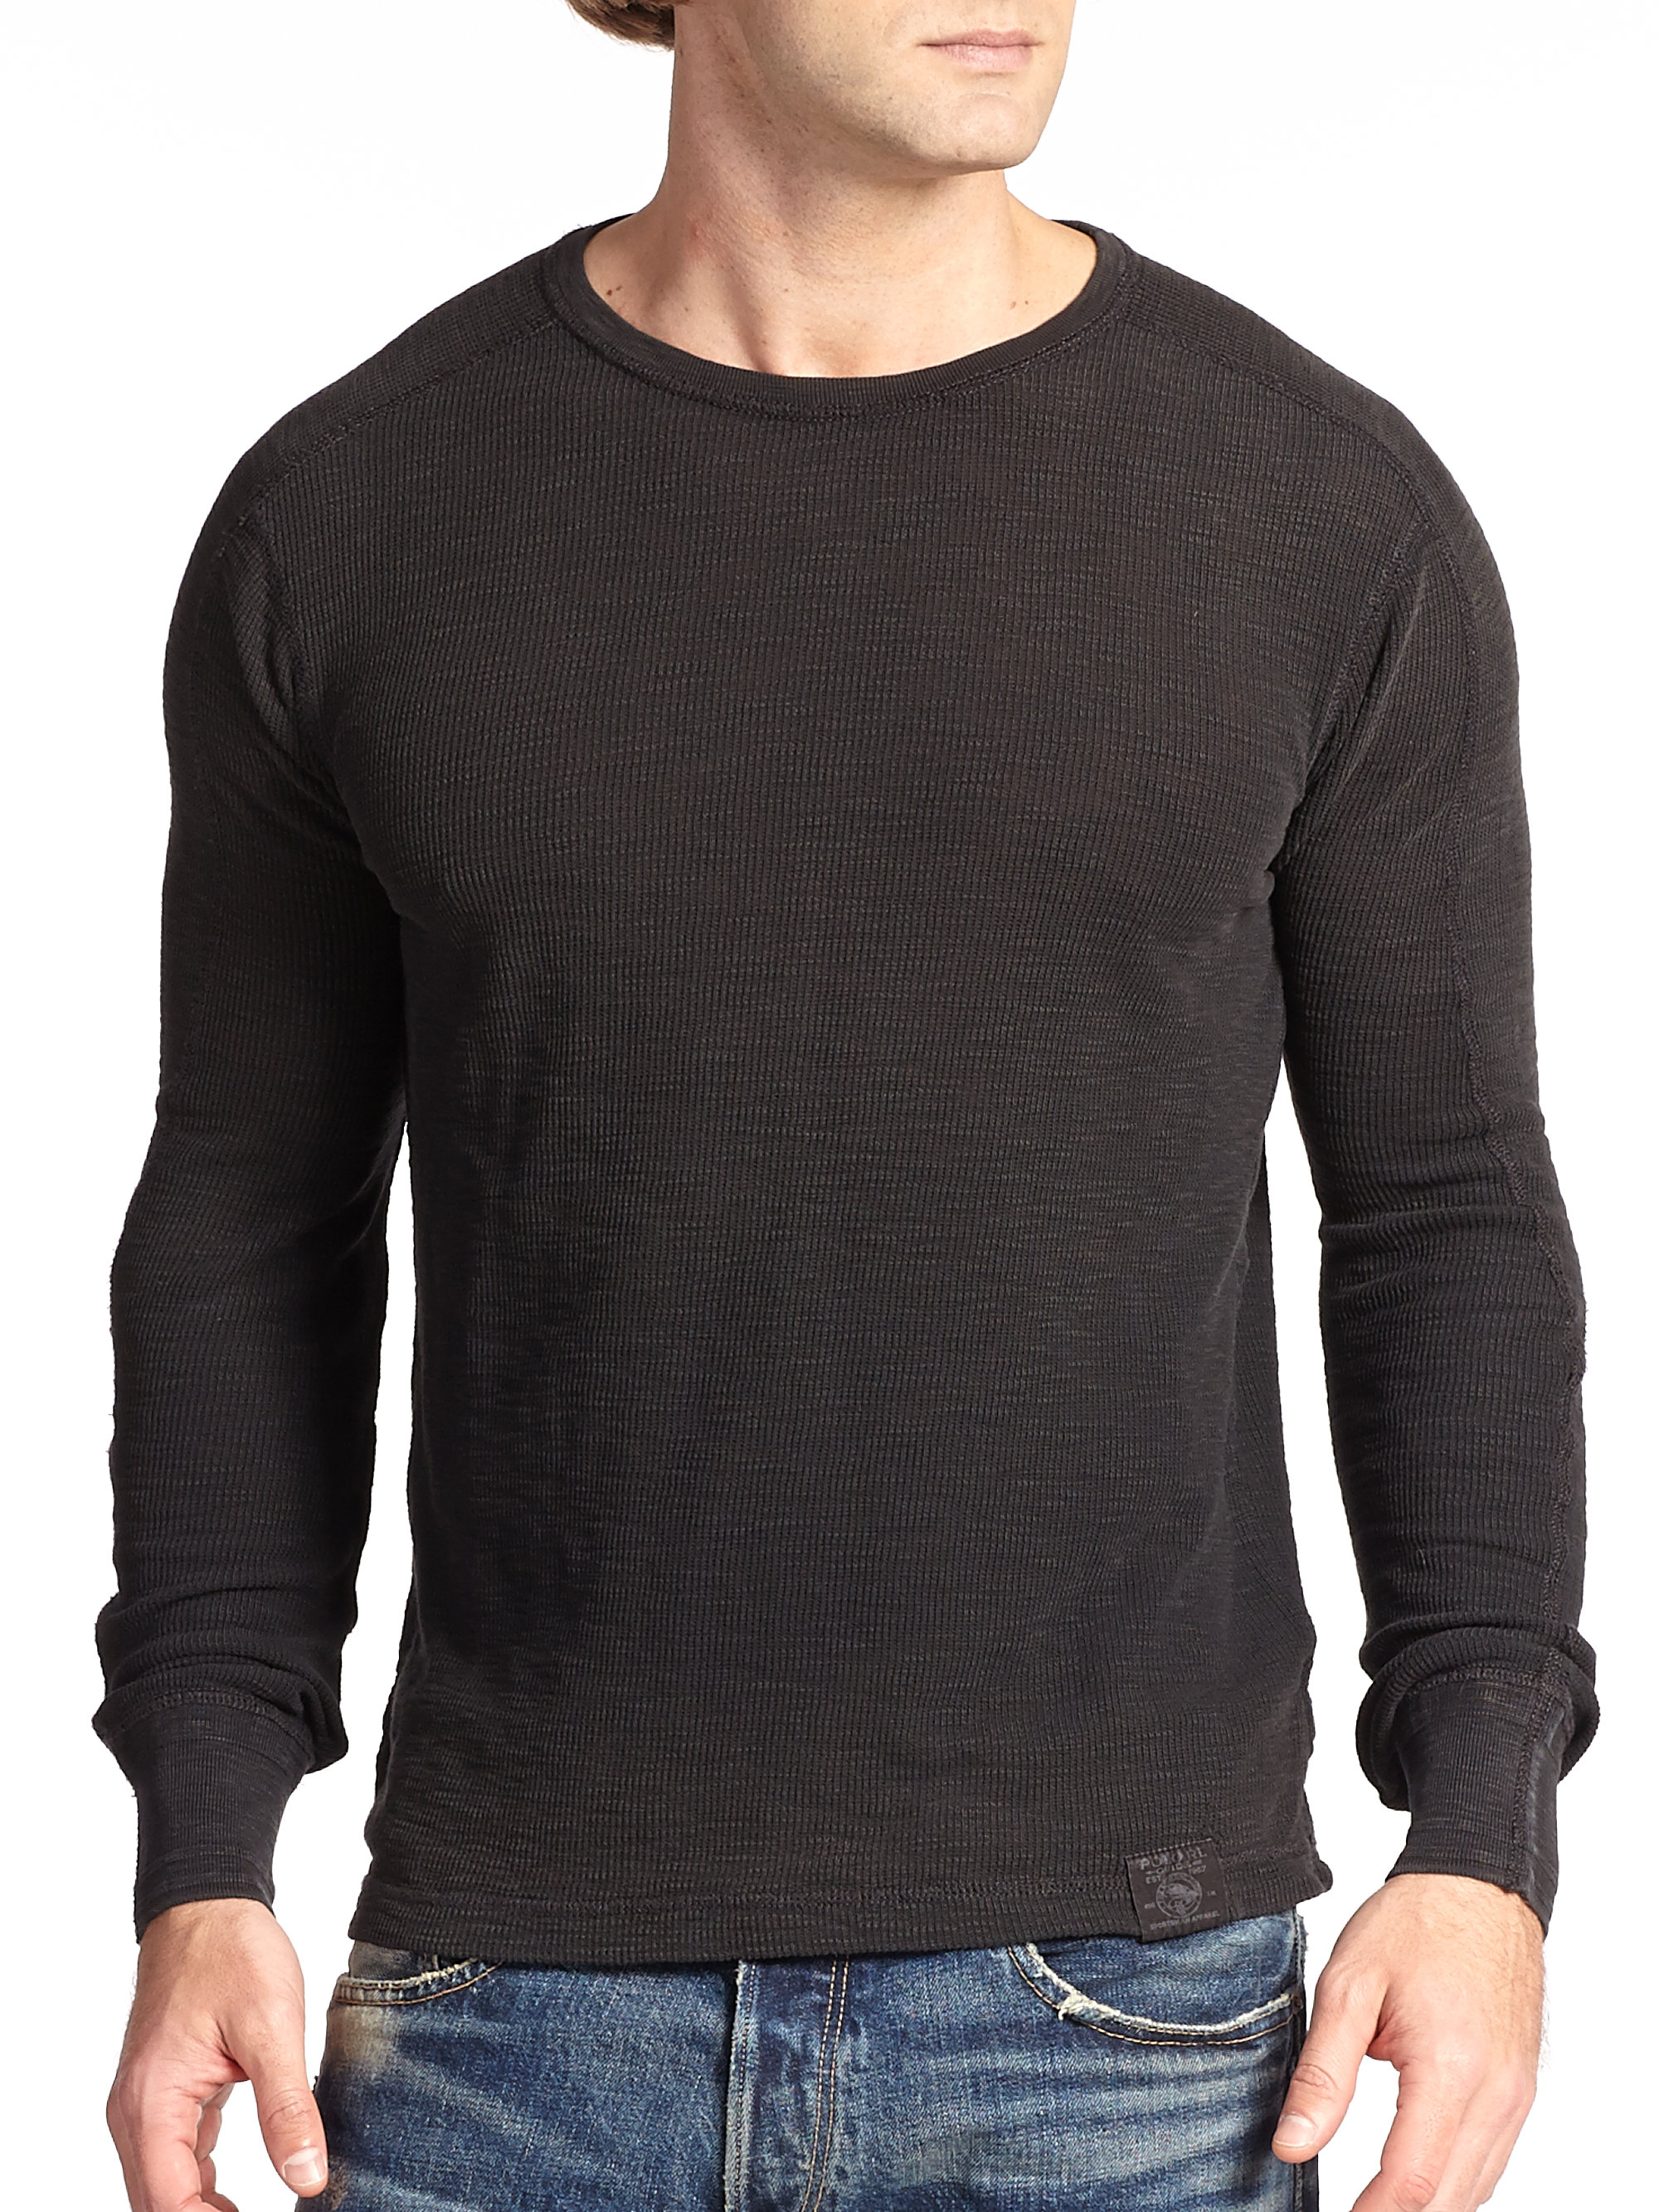 Lyst - Polo Ralph Lauren Waffle-knit Crewneck Tee in Black for Men